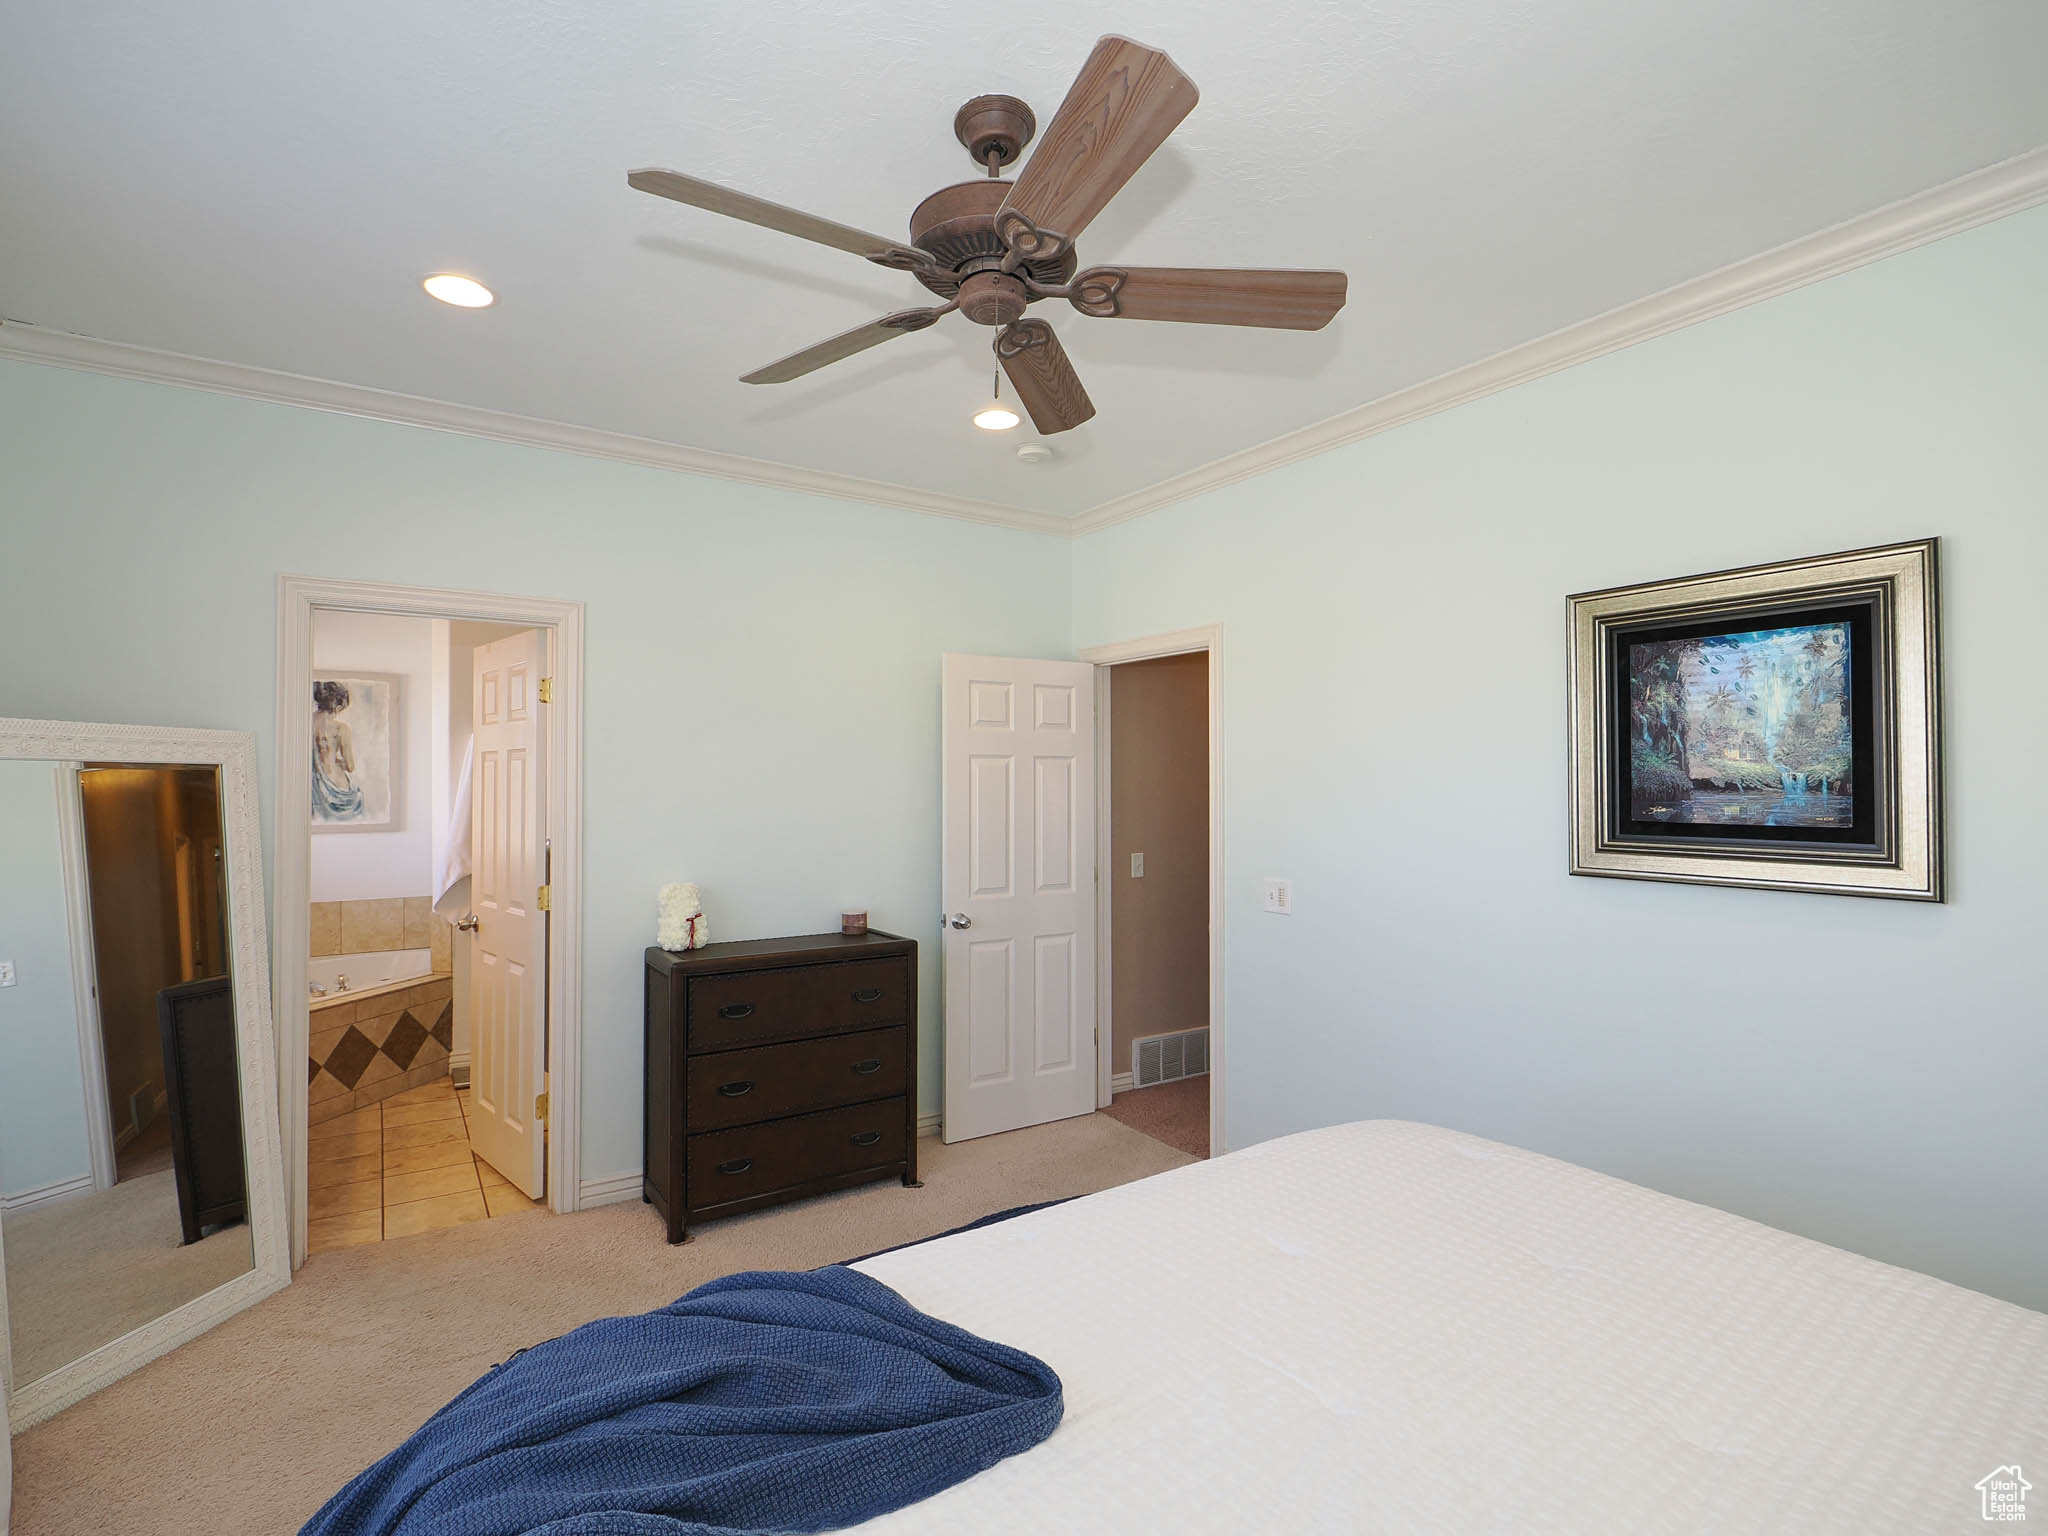 Master bedroom featuring ceiling fan, crown molding, and ensuite bathroom and large walk-in closet